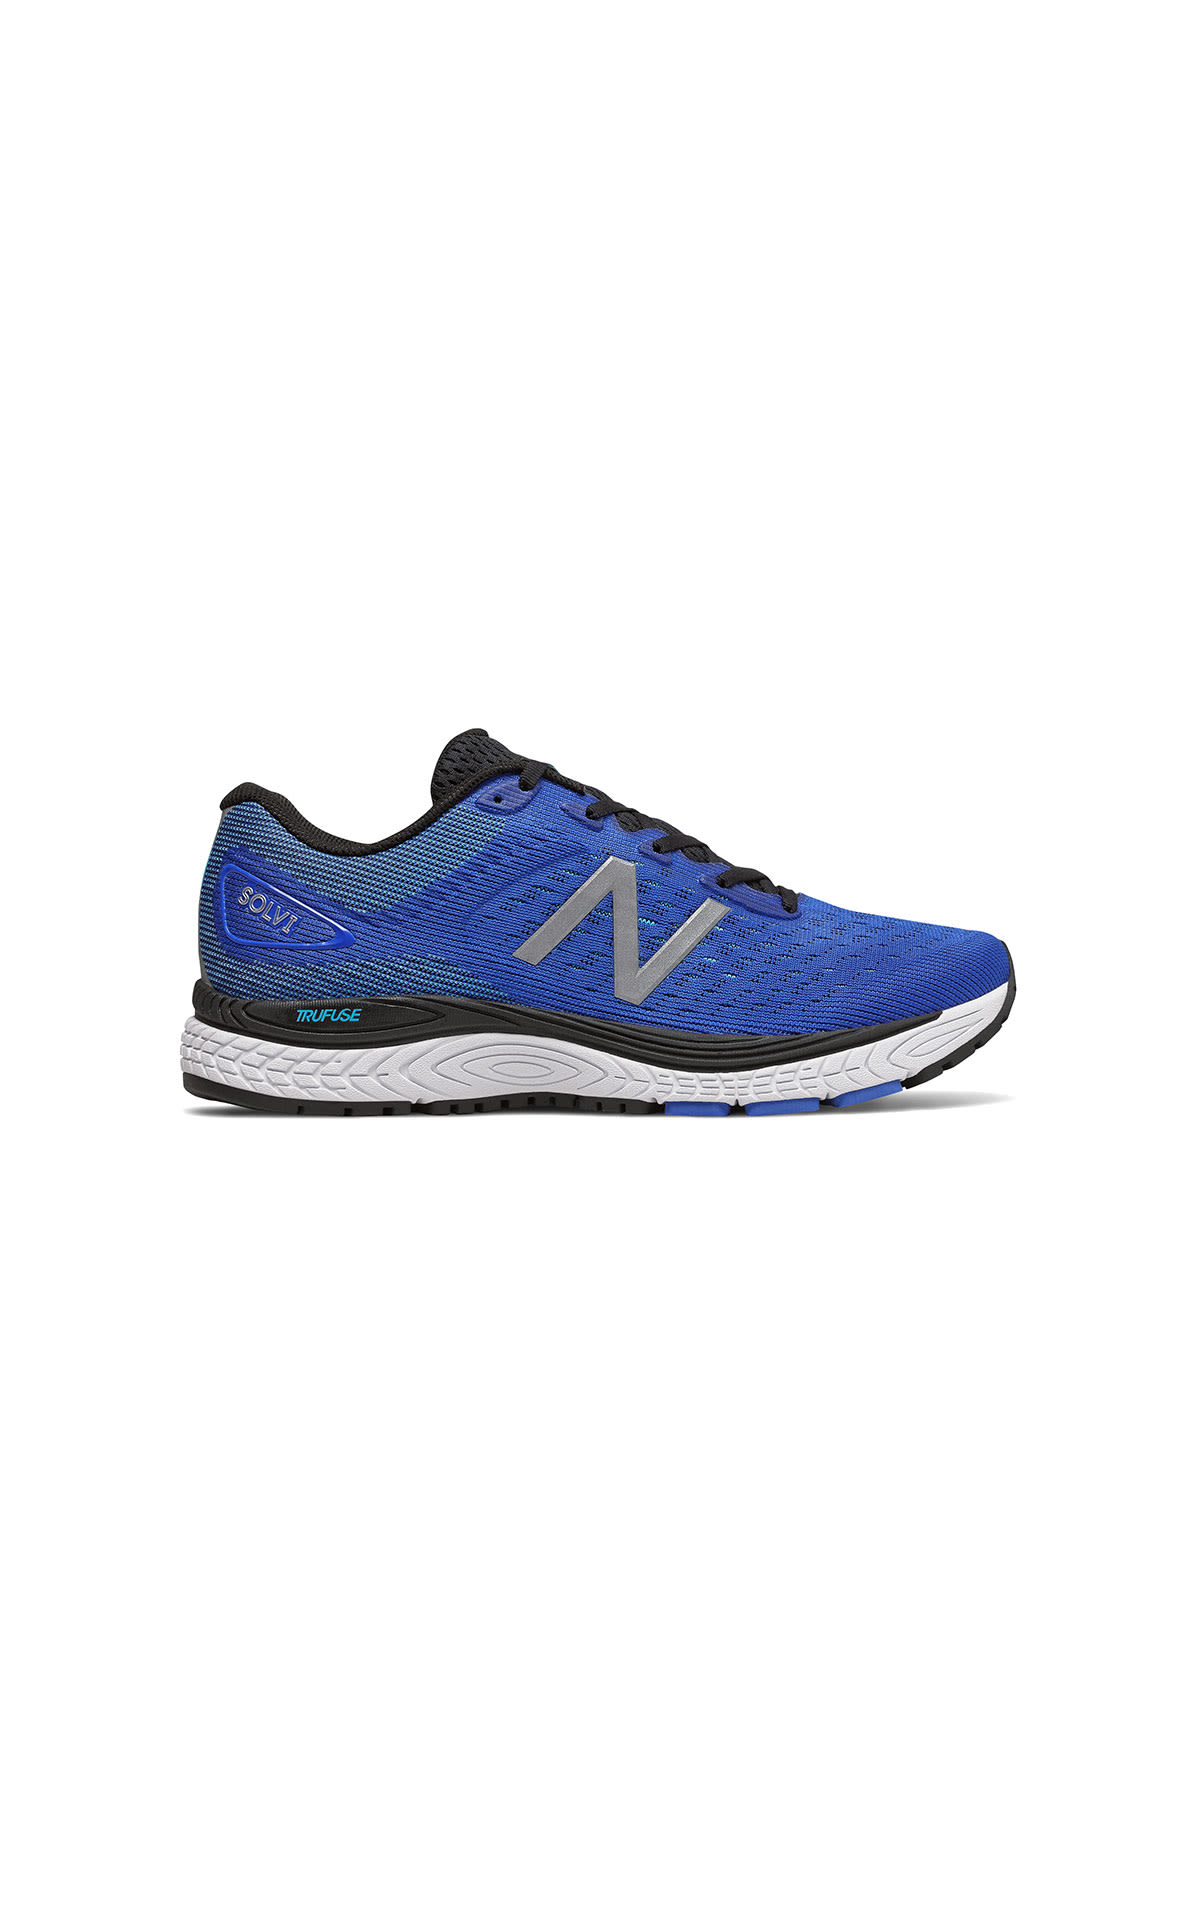 New Balance SOLVI V2 in blue at The Bicester Village Shopping Collection